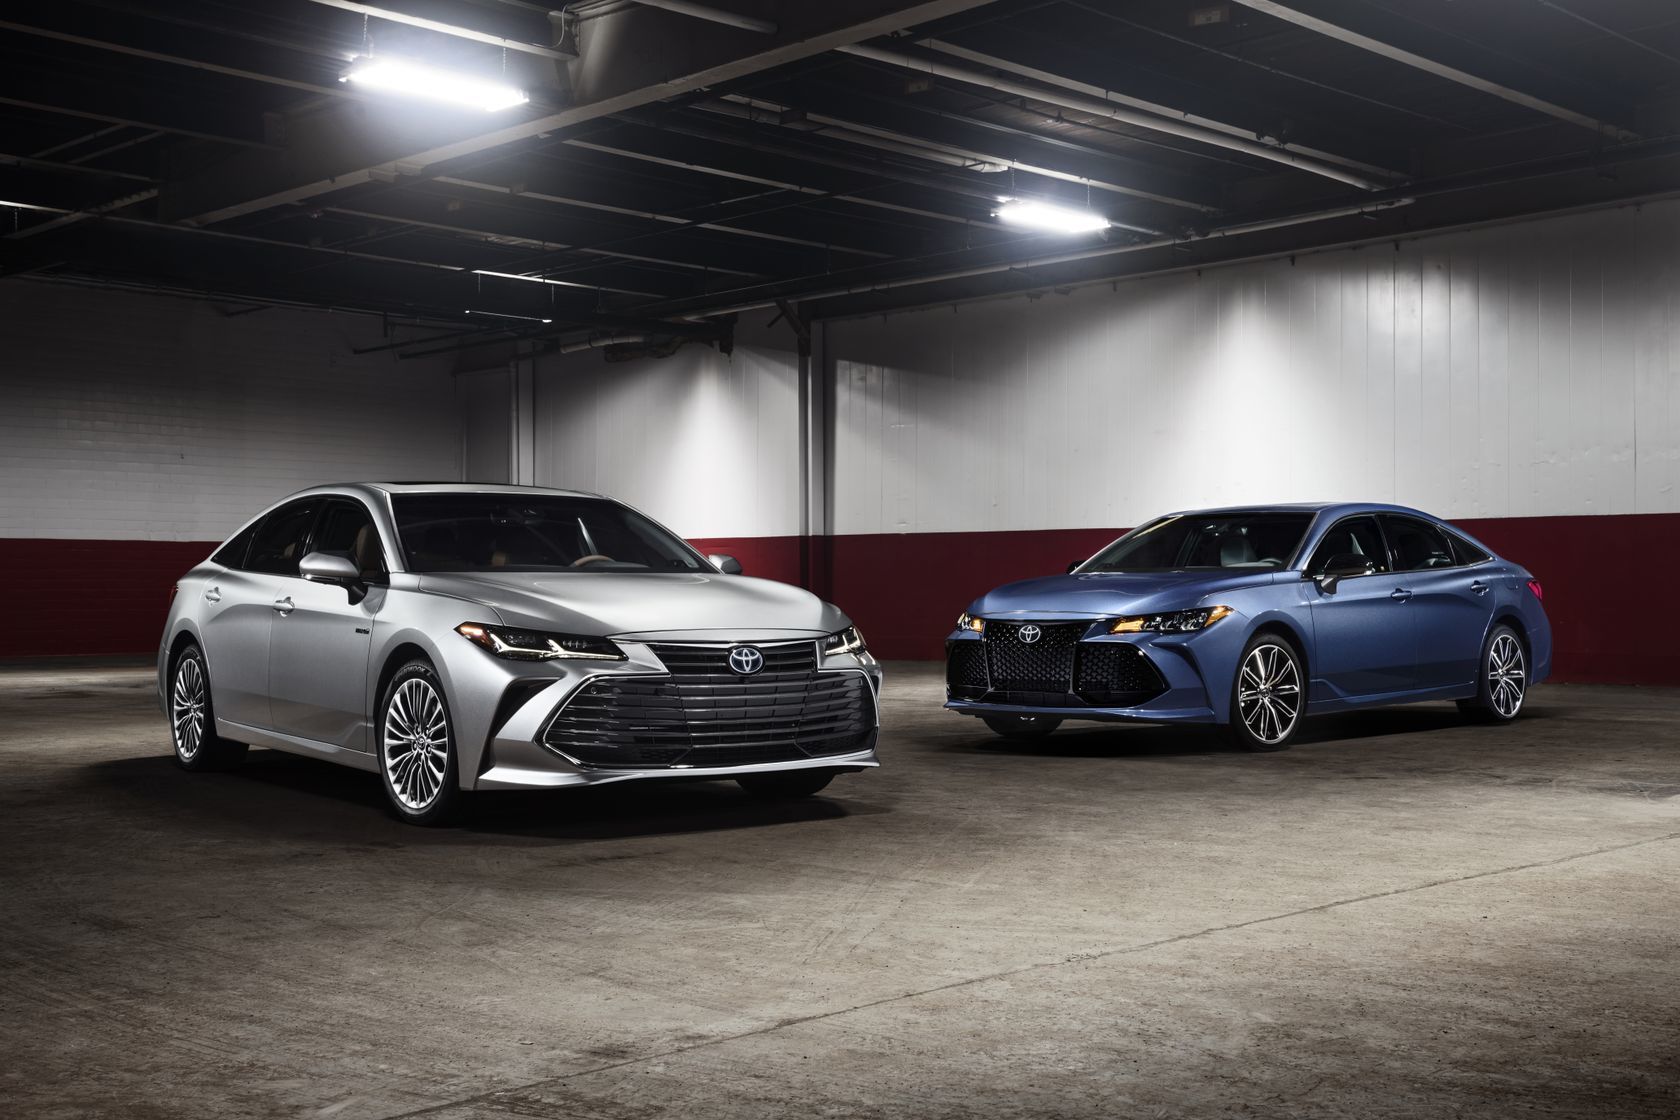 The new 2019 Toyota Avalon soon available at Longueuil Toyota